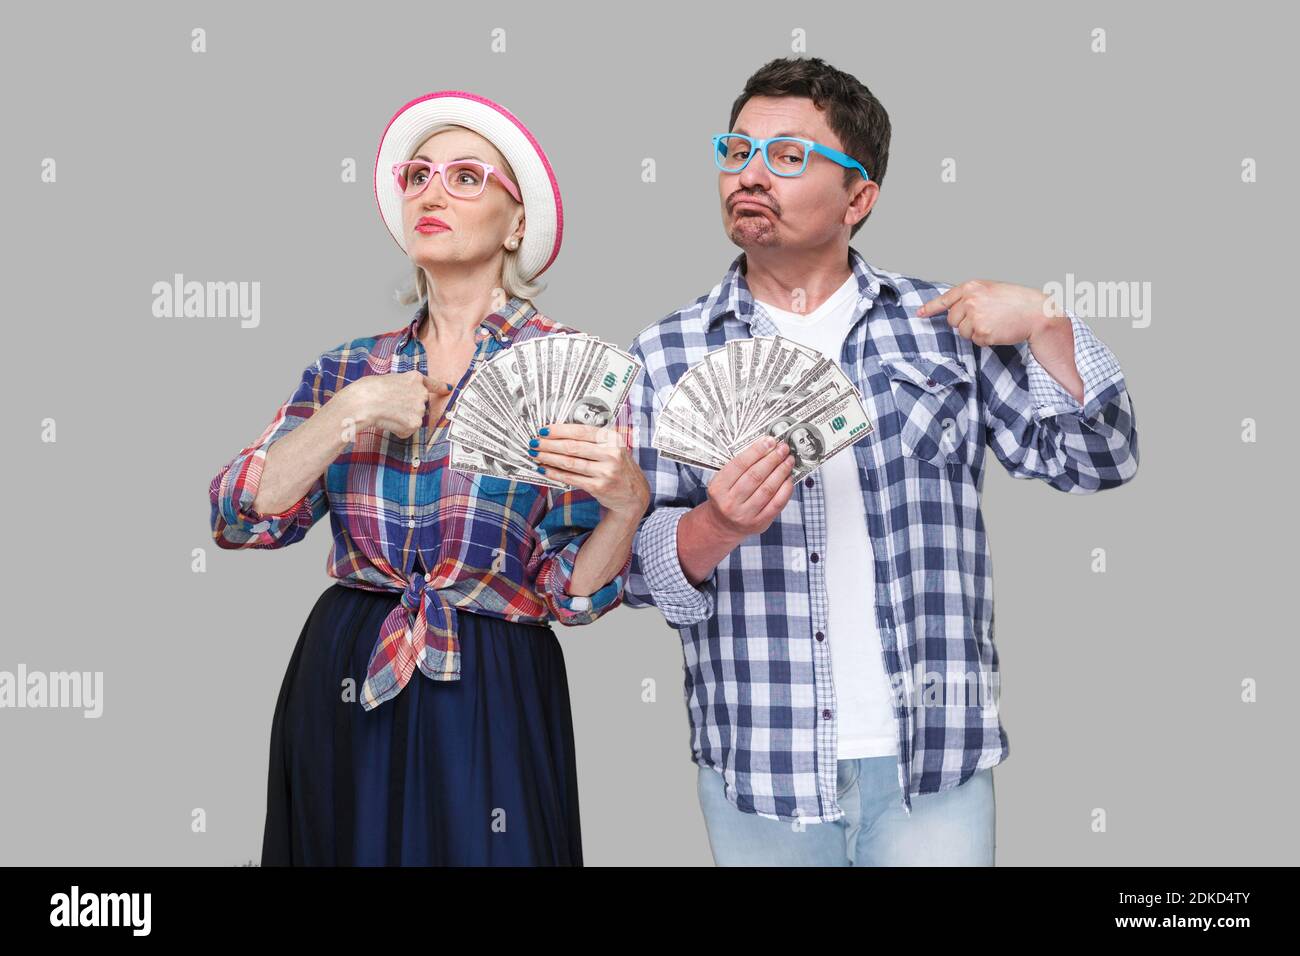 Couple of confident friends, adult man and woman in casual checkered shirt standing together holding fan of dollars and pointing fingers to themself w Stock Photo